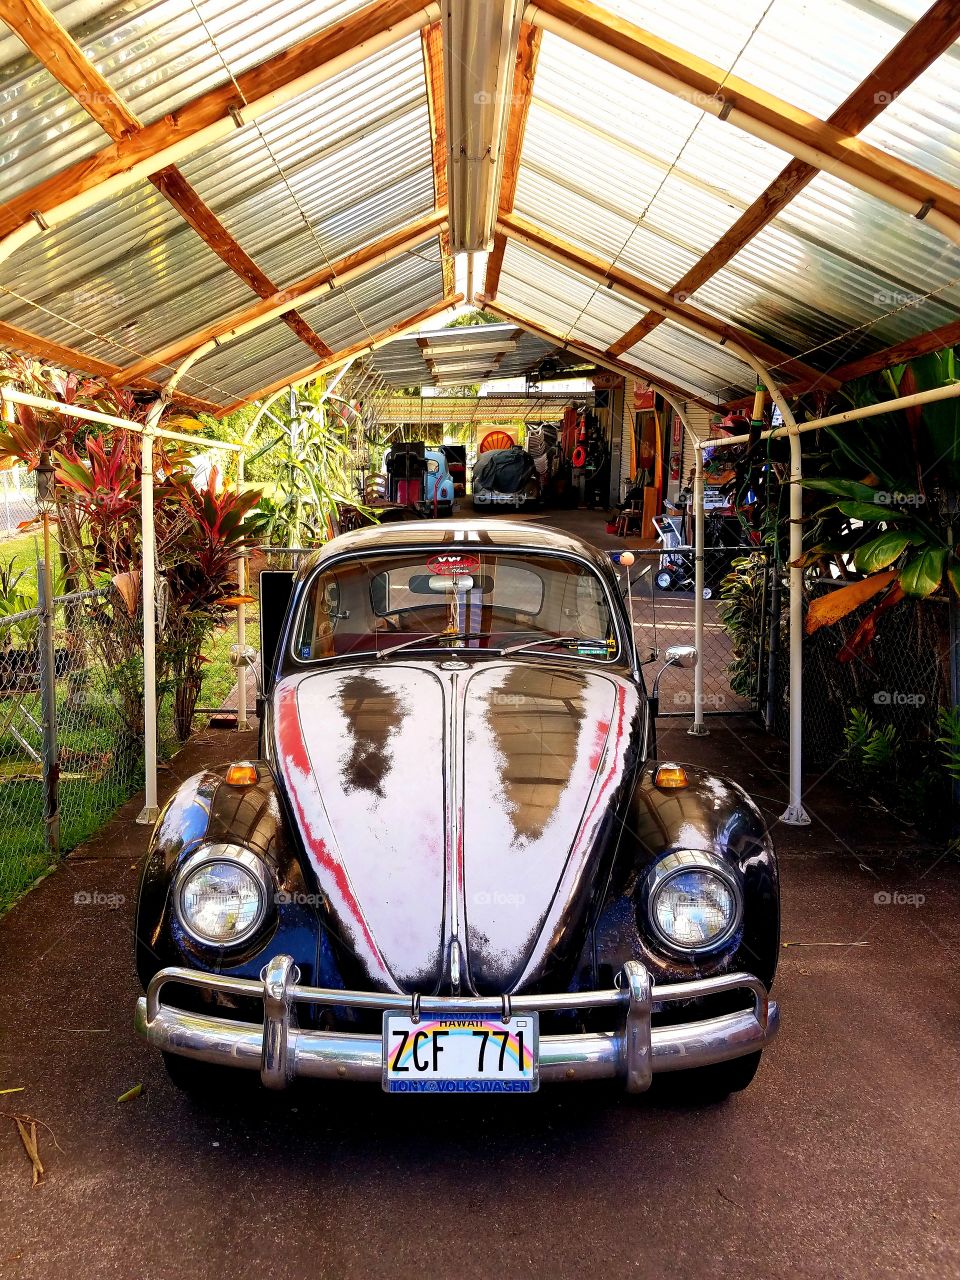 Volkswagon bug oval window, old school  with original paint and interior.  VW life on the Big Island.